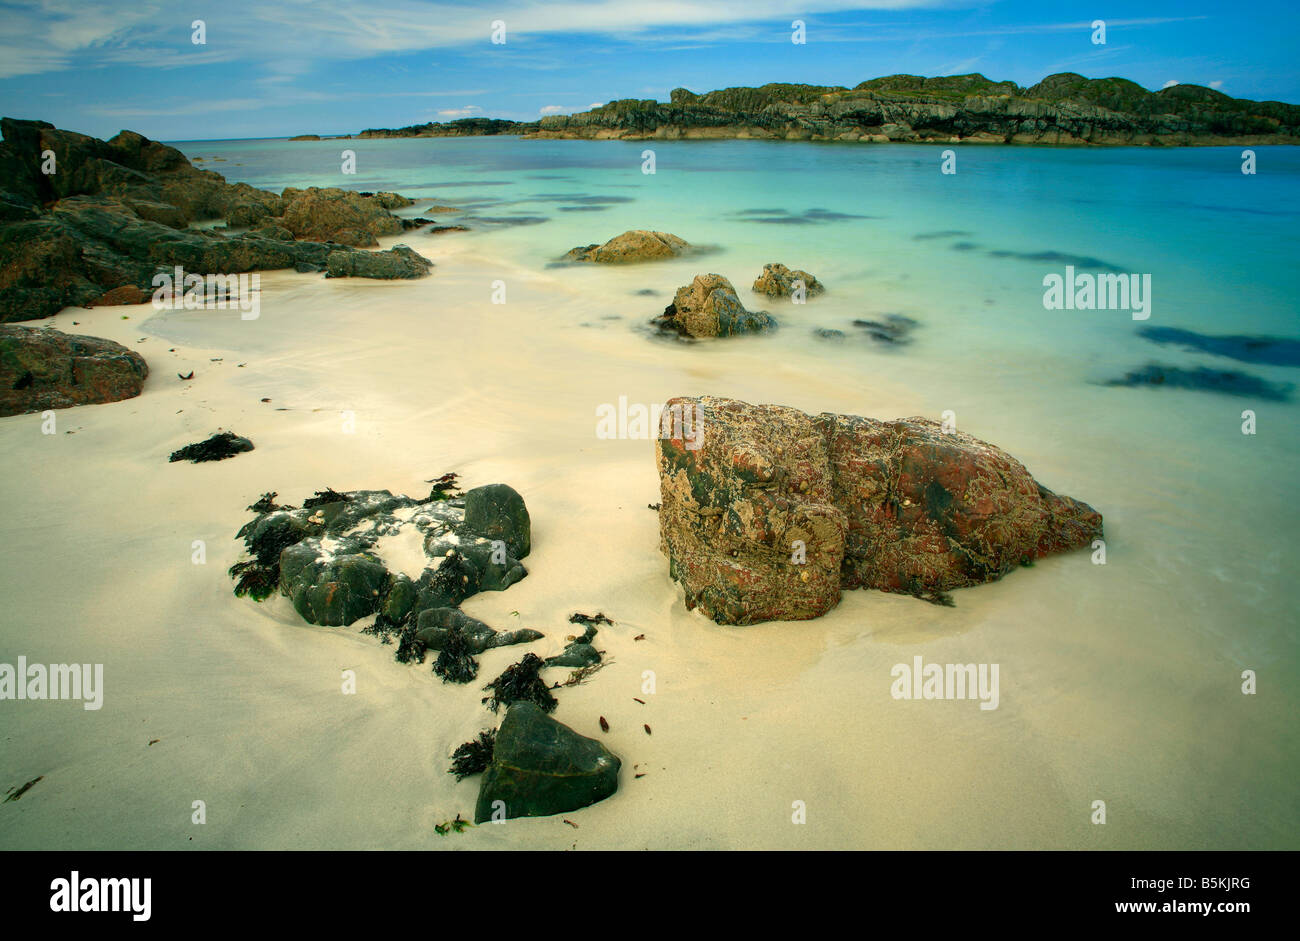 A view of a beutiful white sand beach and aquamarine sea on the west coast of the Isle of Iona in Scotland Stock Photo